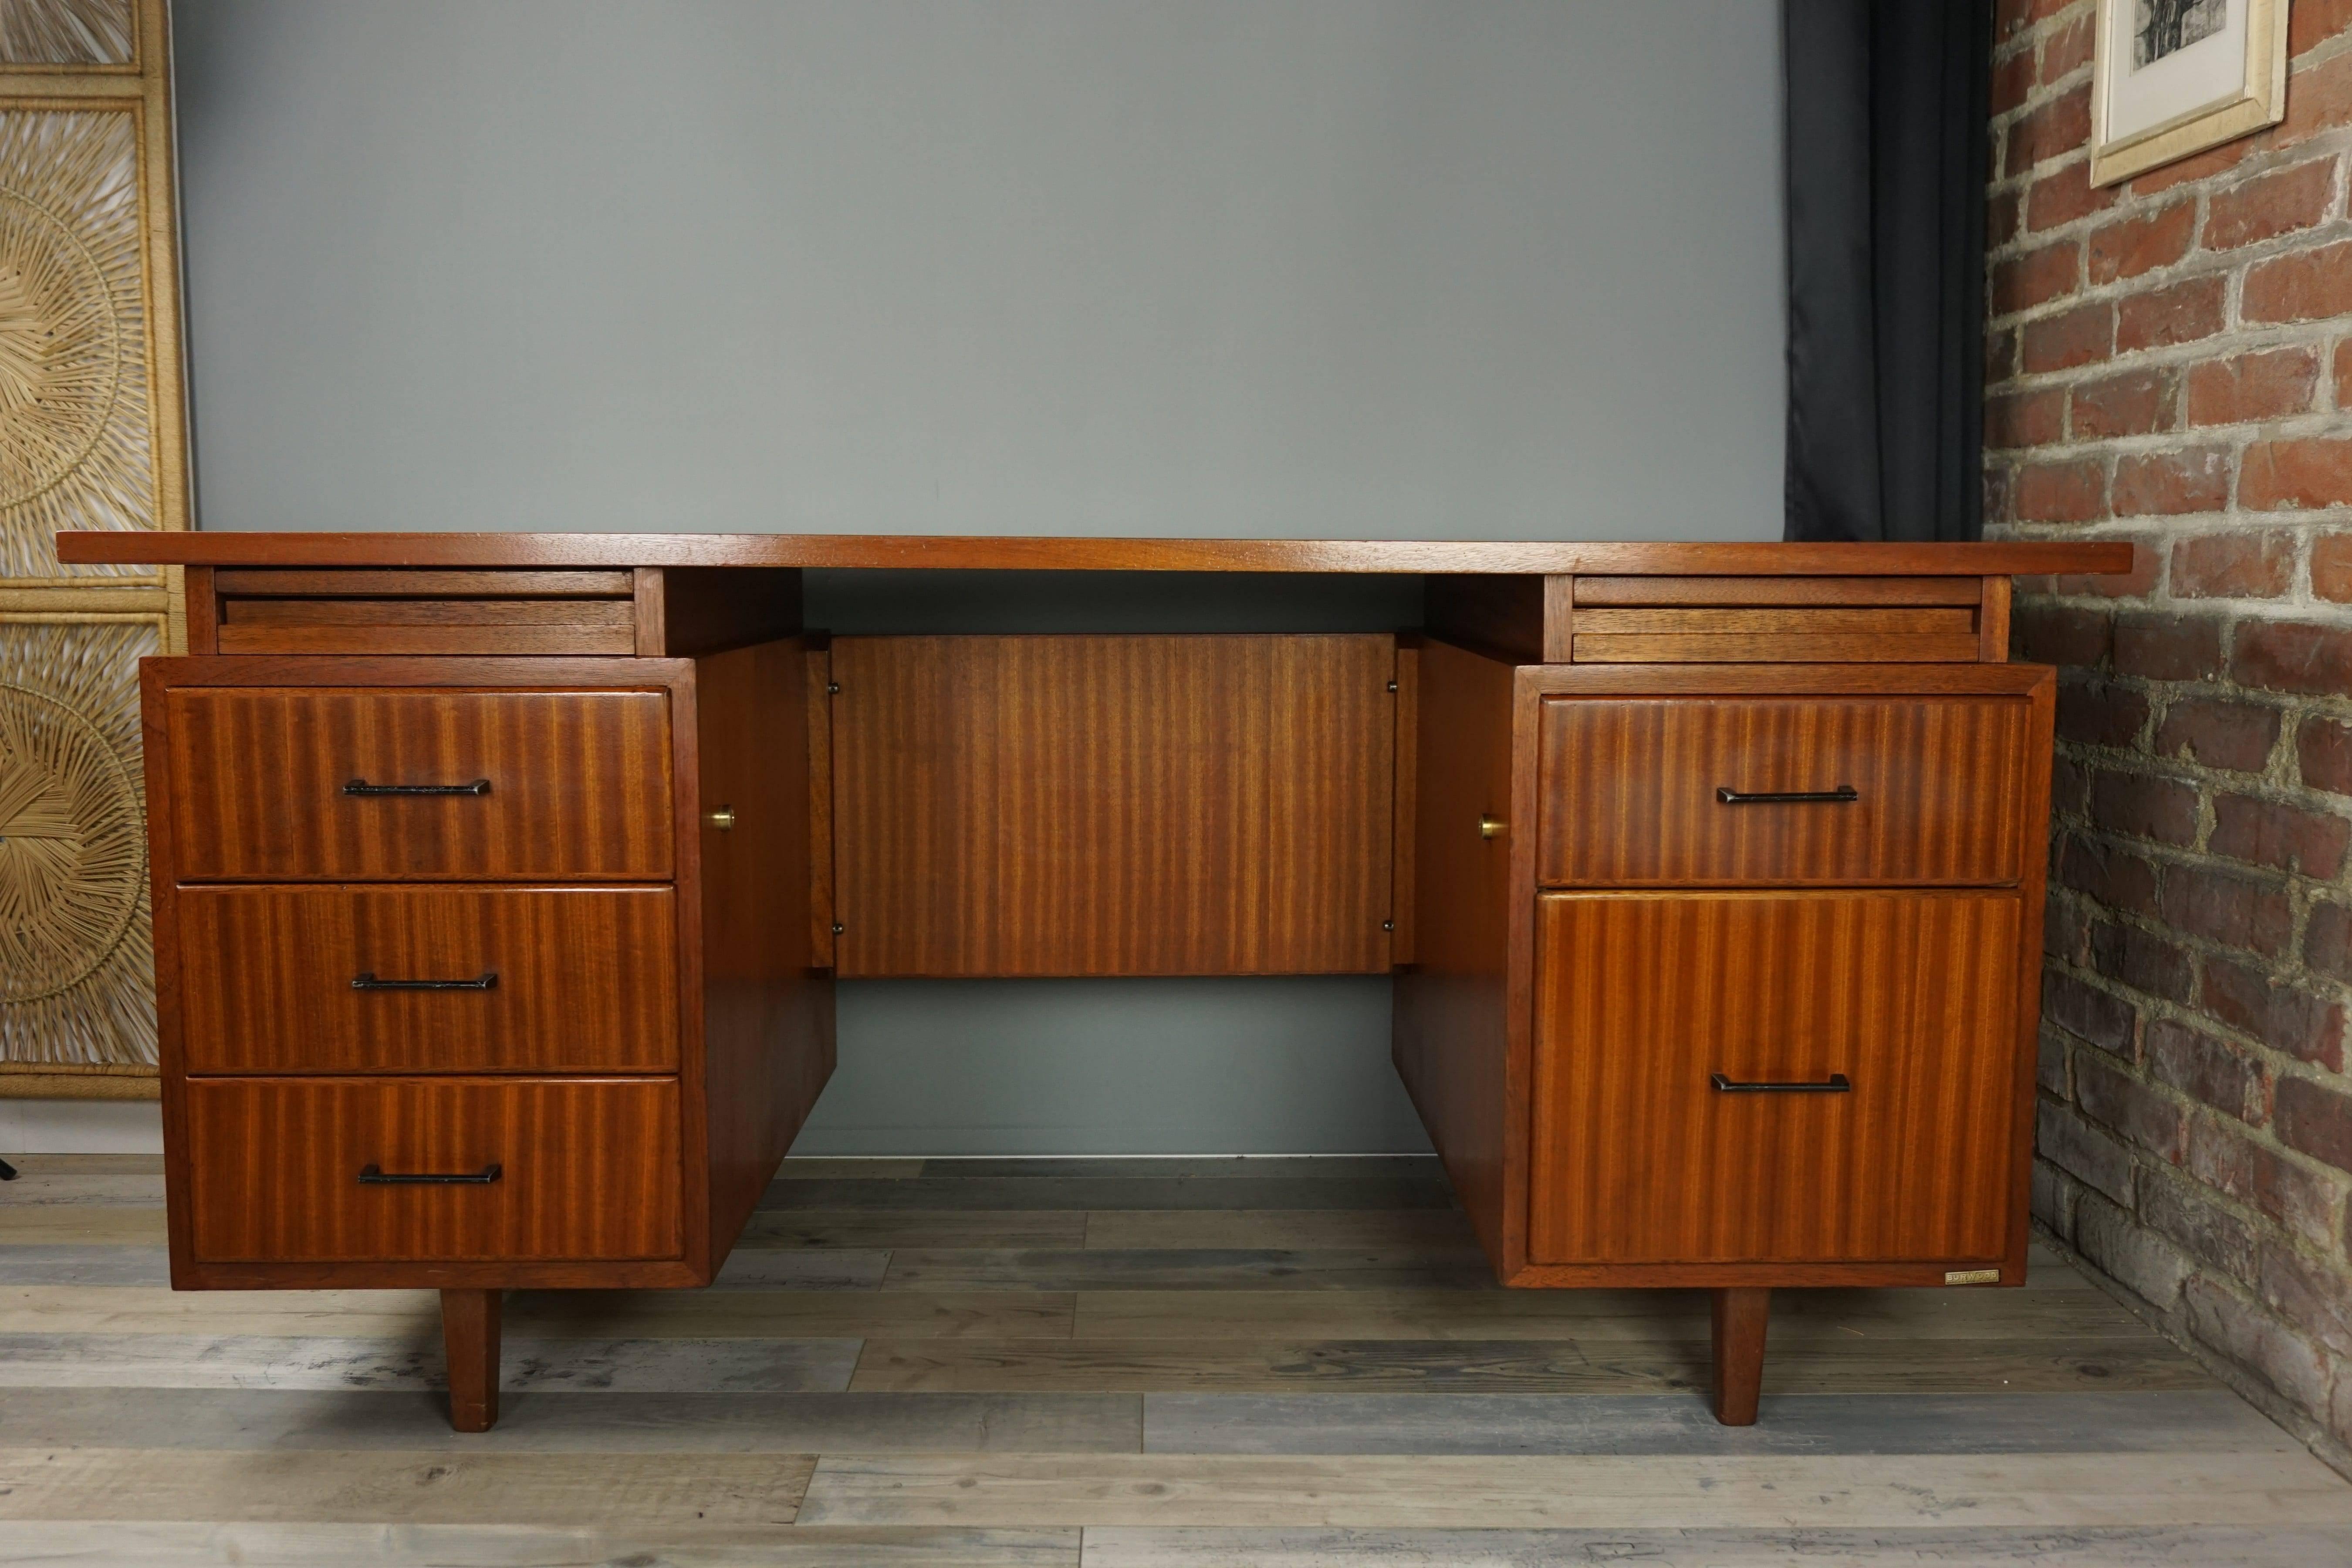 This Burwood brand executive desk, from the late 1950s, robust and high quality, consists of a rectangular tray resting on two boxes opening with five drawers mounted dovetail. One of them is a filing cabinet drawer and two drawers pencil-holder